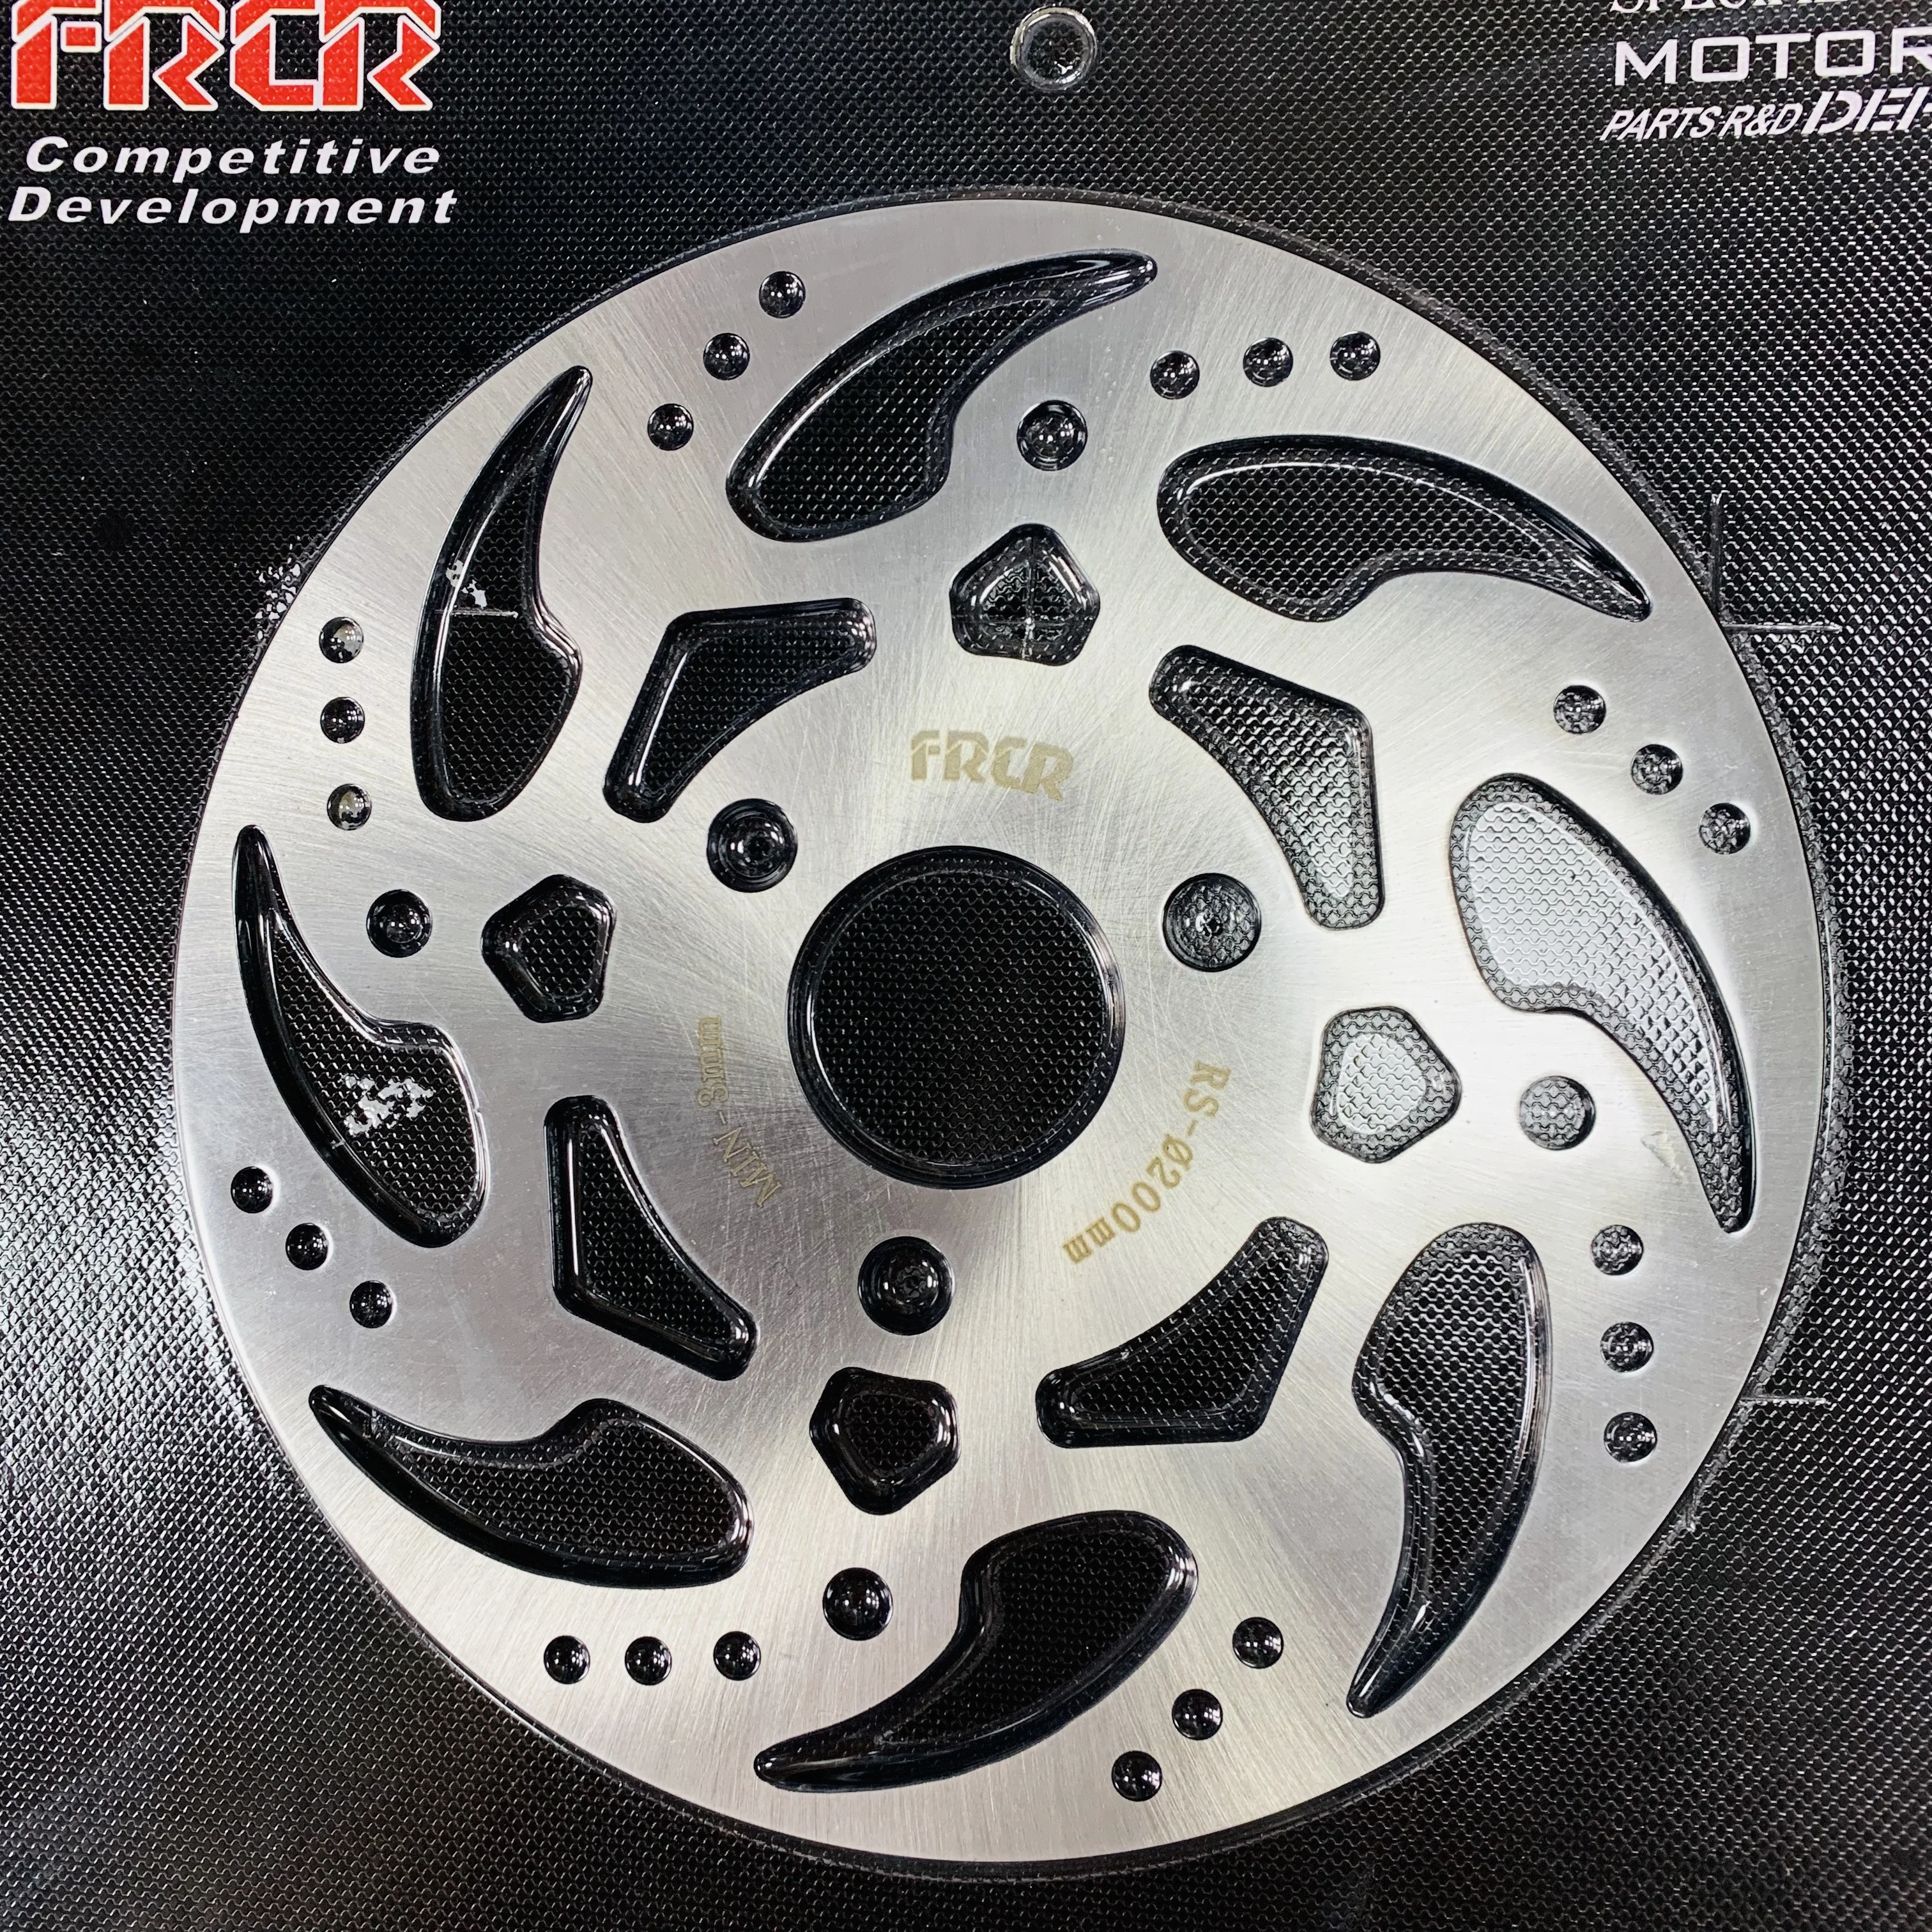 Brake Disk 160mm 200mm JOG100 ZY100 CUXI100 RS100 RSZ100 Racing Tuning Upgrade Scooter Brakes Jog Cuxi Zy Rsz 100 Parts